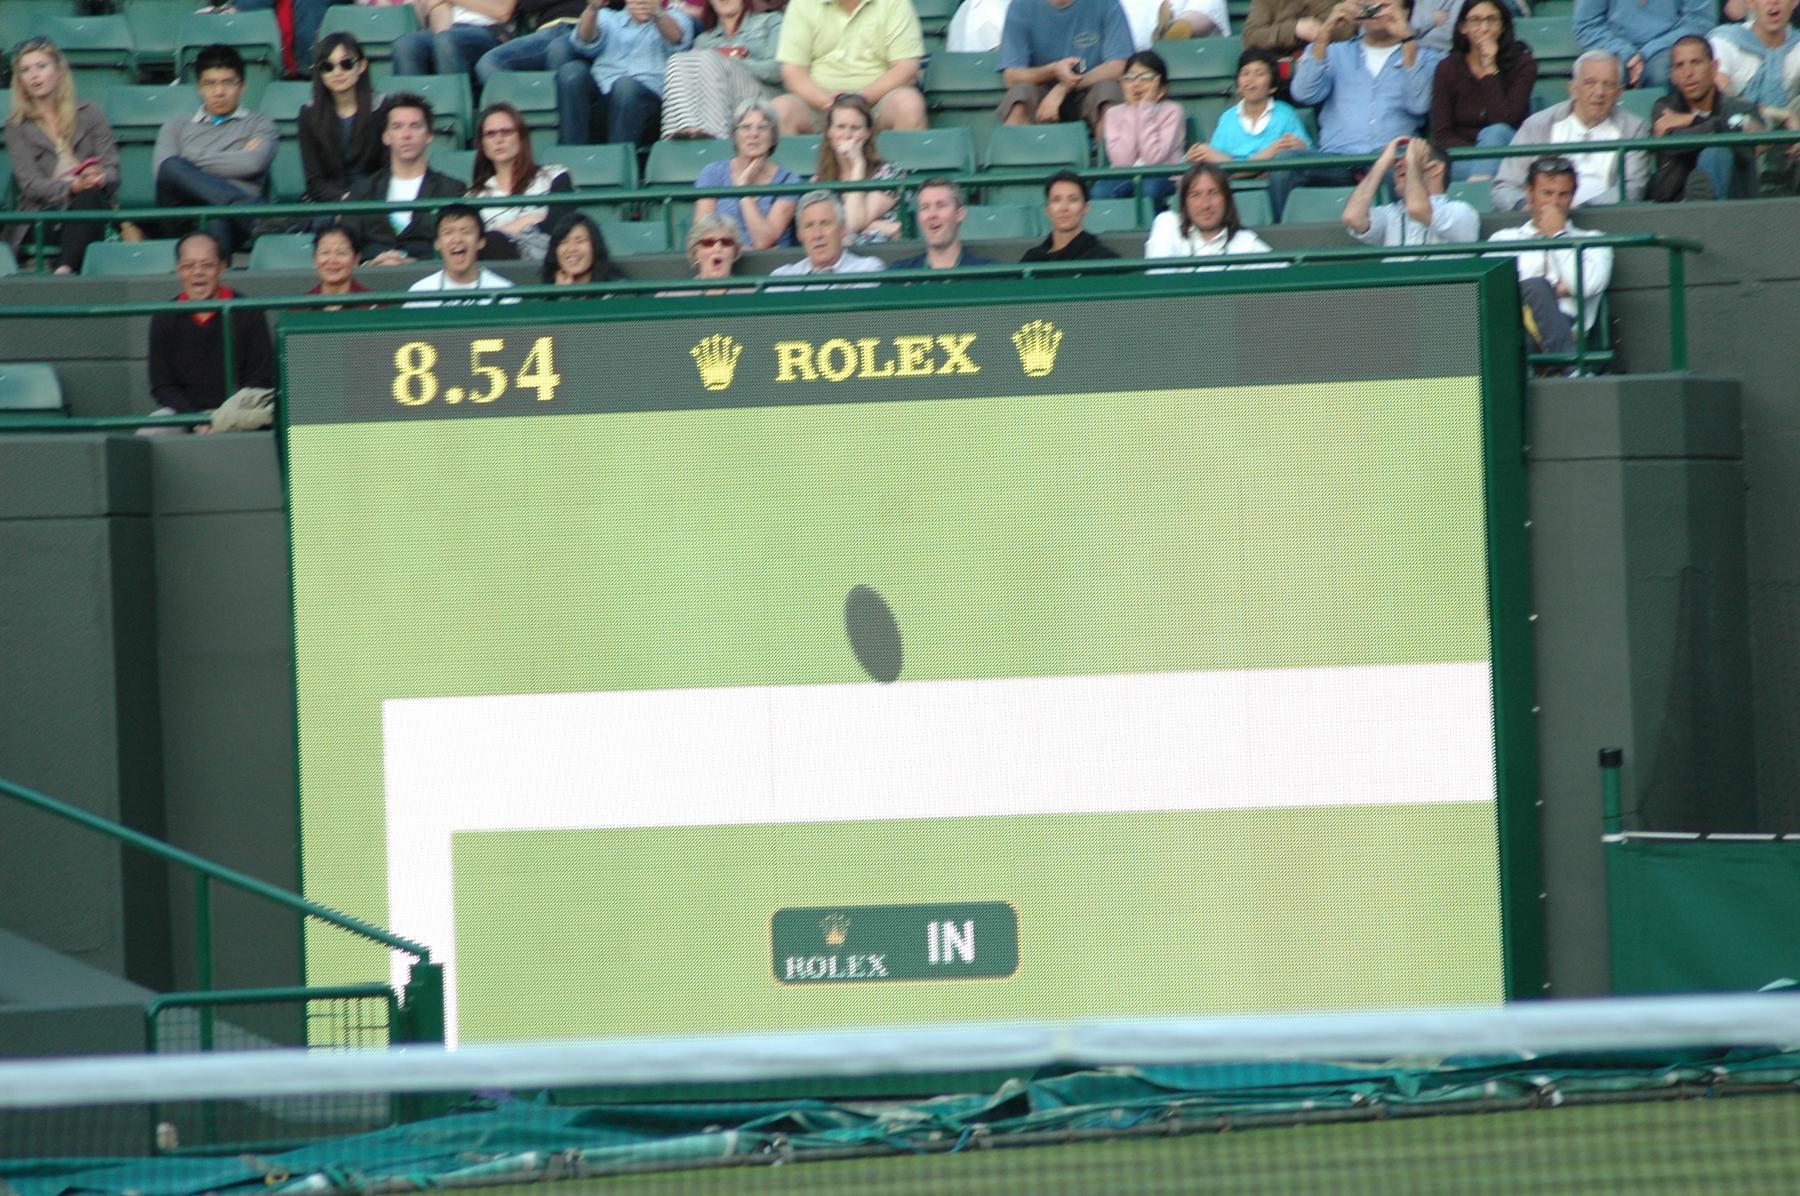 File:The decision of In or Out with the help of Technology at Wimbledon.jpg - Image of Technology, S